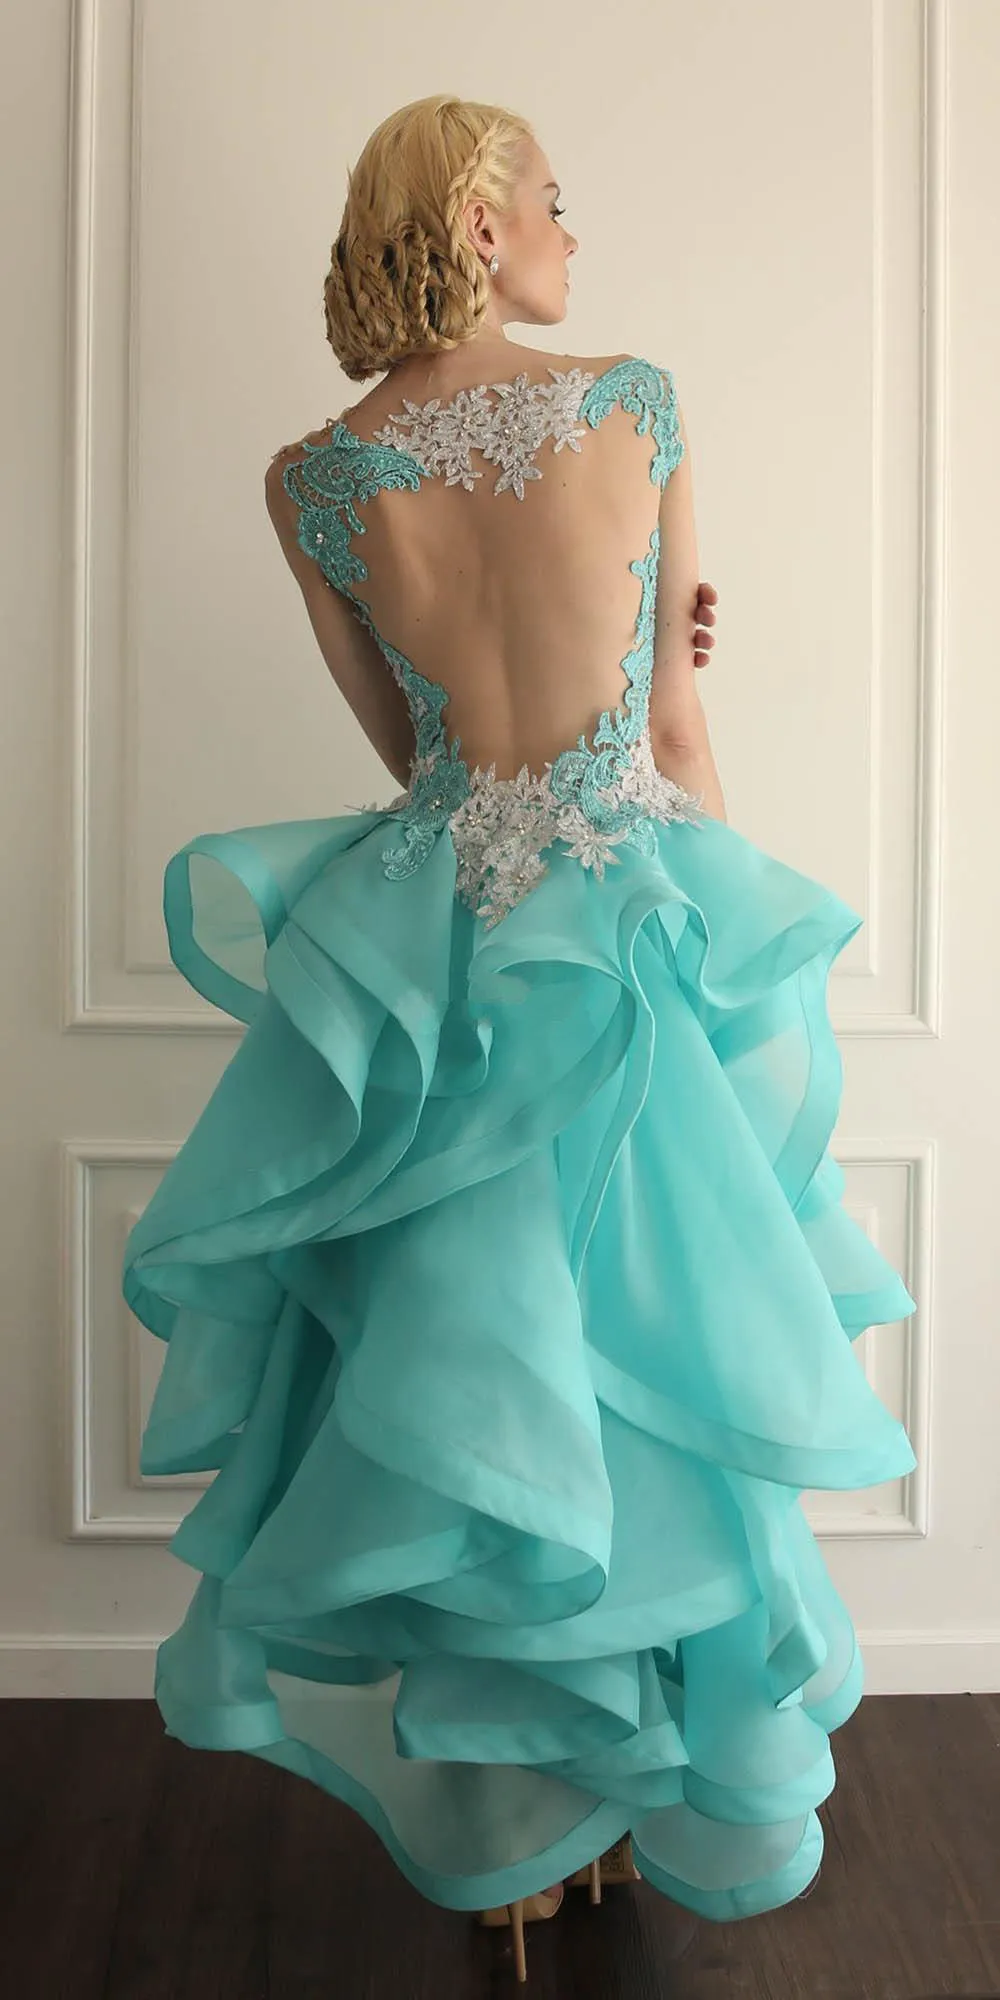 Jewel Sheer Neckline High Low Short Homecoming Dresses Turquoise Prom Gowns With Lace Applique Backless Ruffles Cocktail Gowns Cus8786982